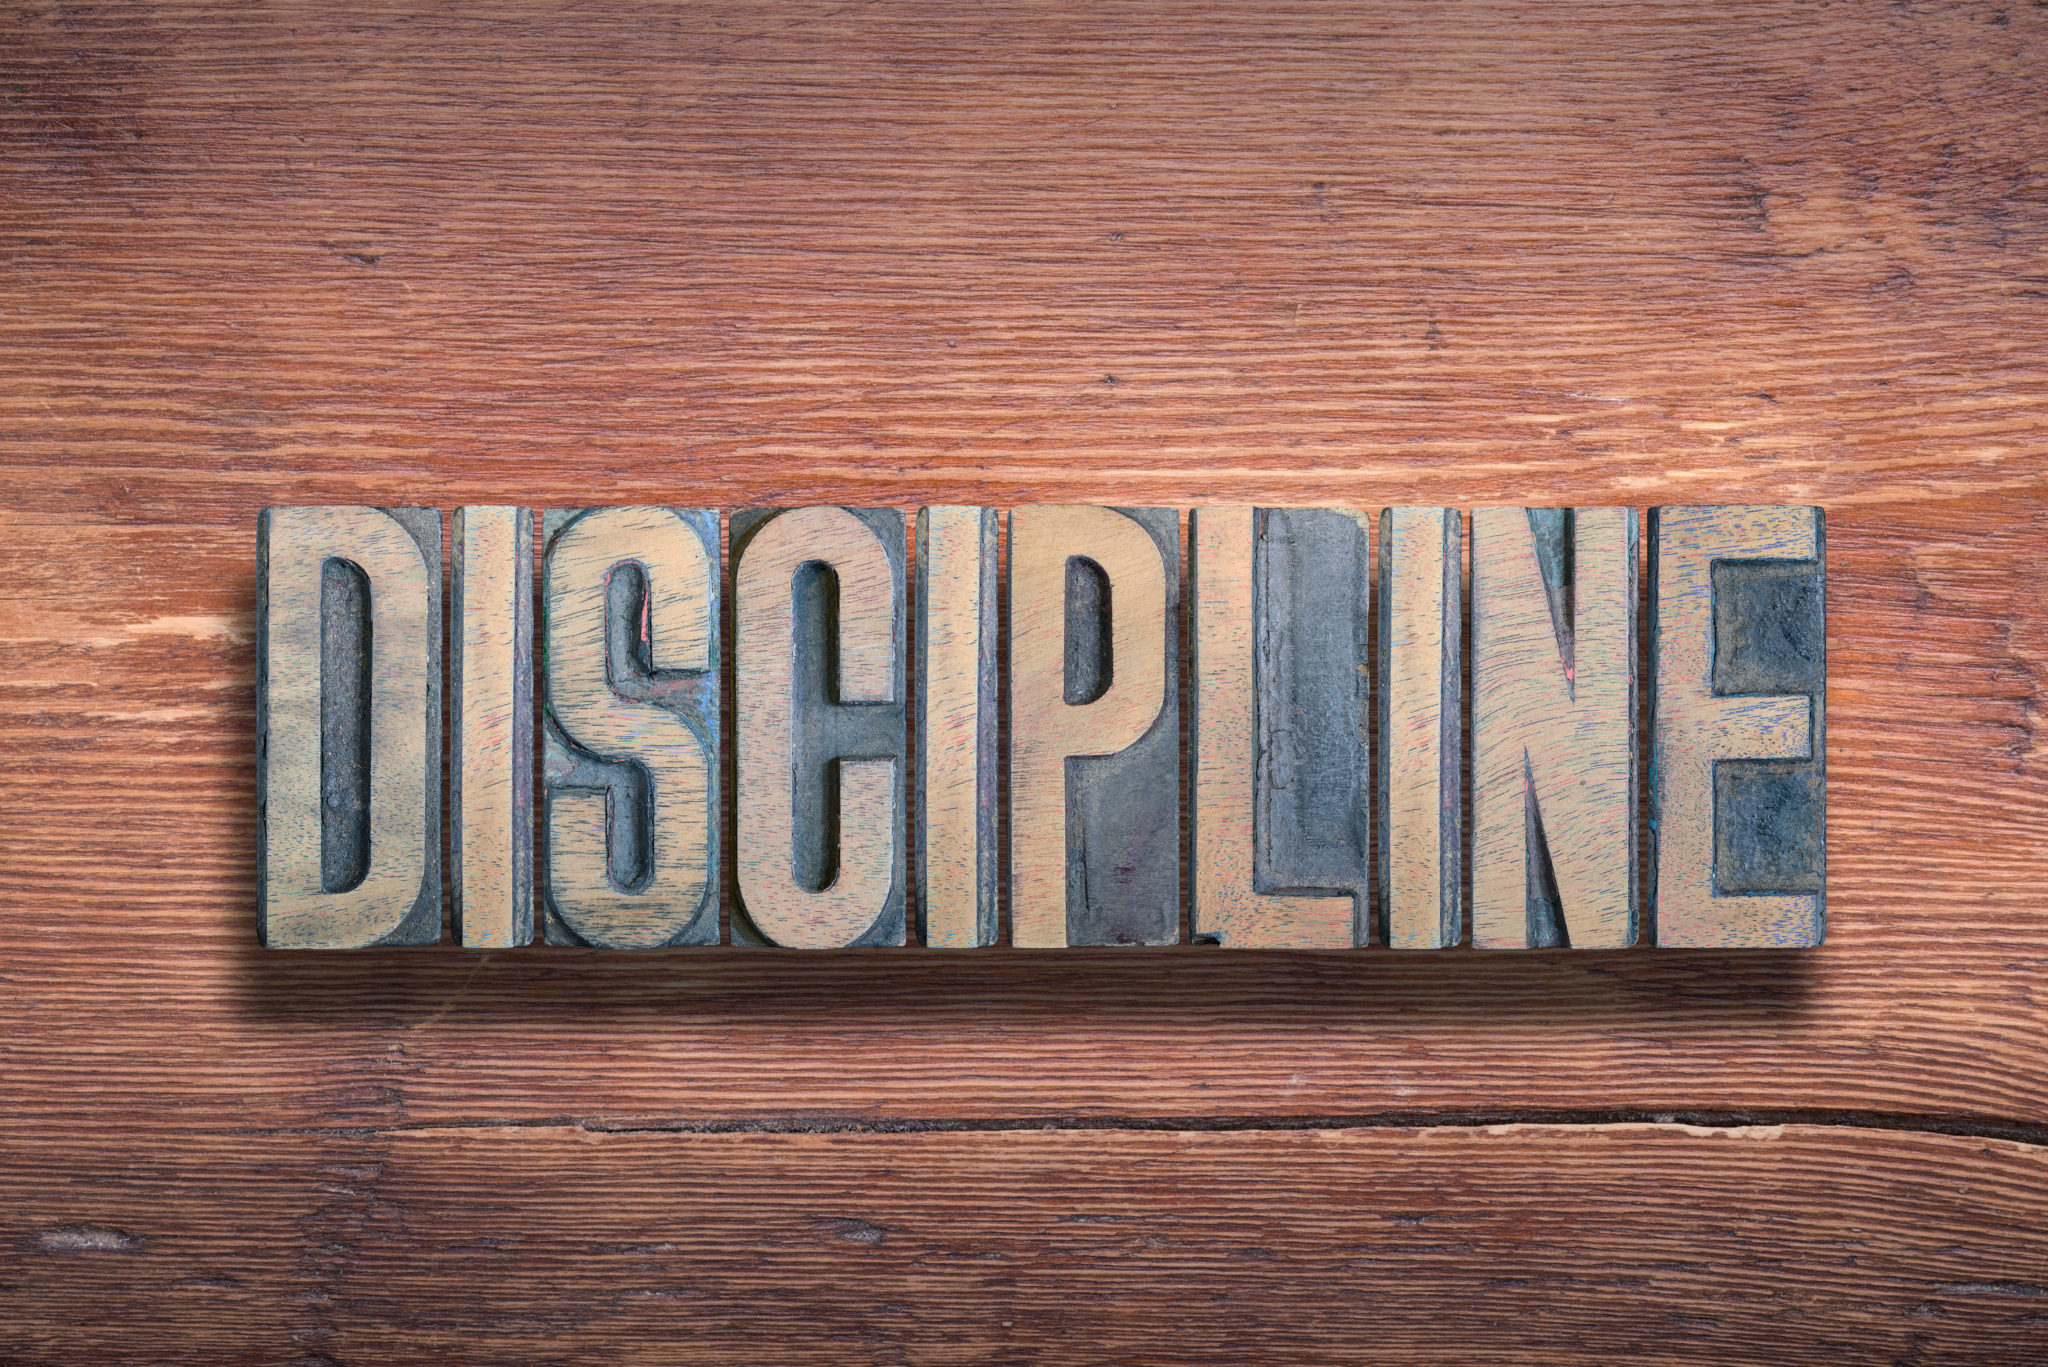 Self-Discipline in Leadership: Why Is It So Important?